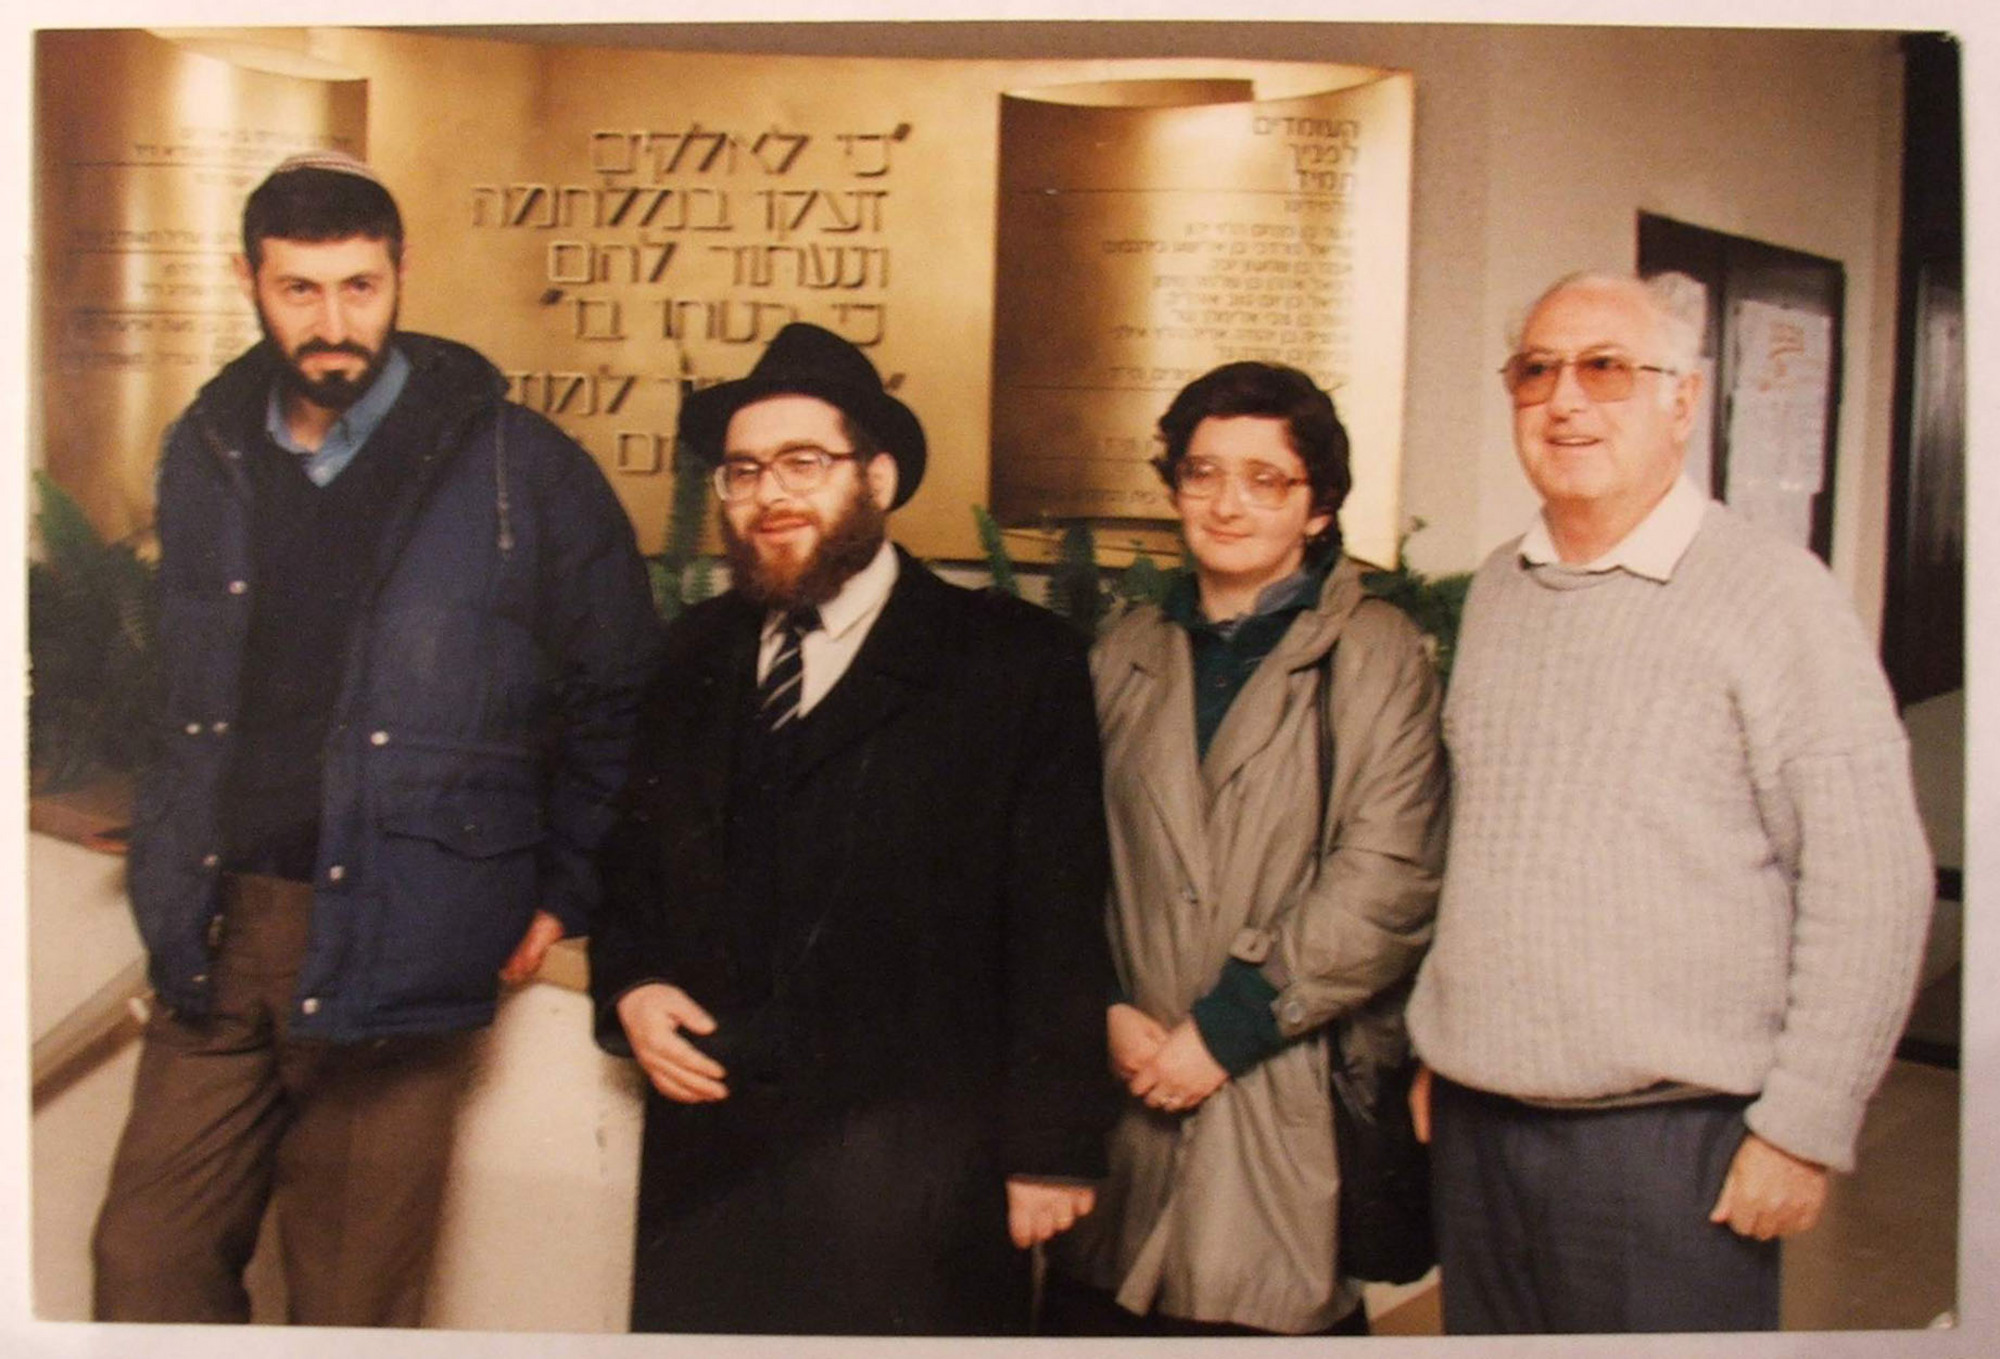 Mr and Mrs Mayer shortly after arriving in Israel, 1991